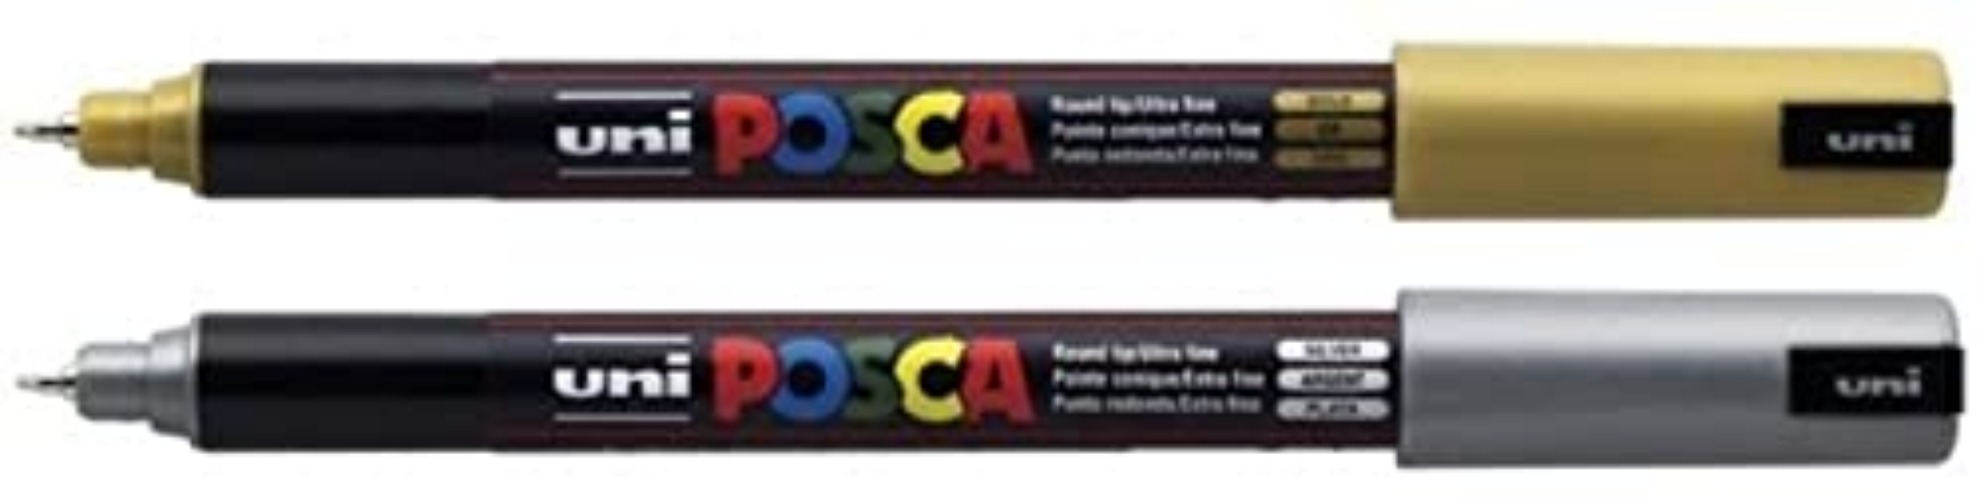 uni-ball POSCA PC-1MR TWIN PACK MARKER PENS GOLD & SILVER - 1 of each